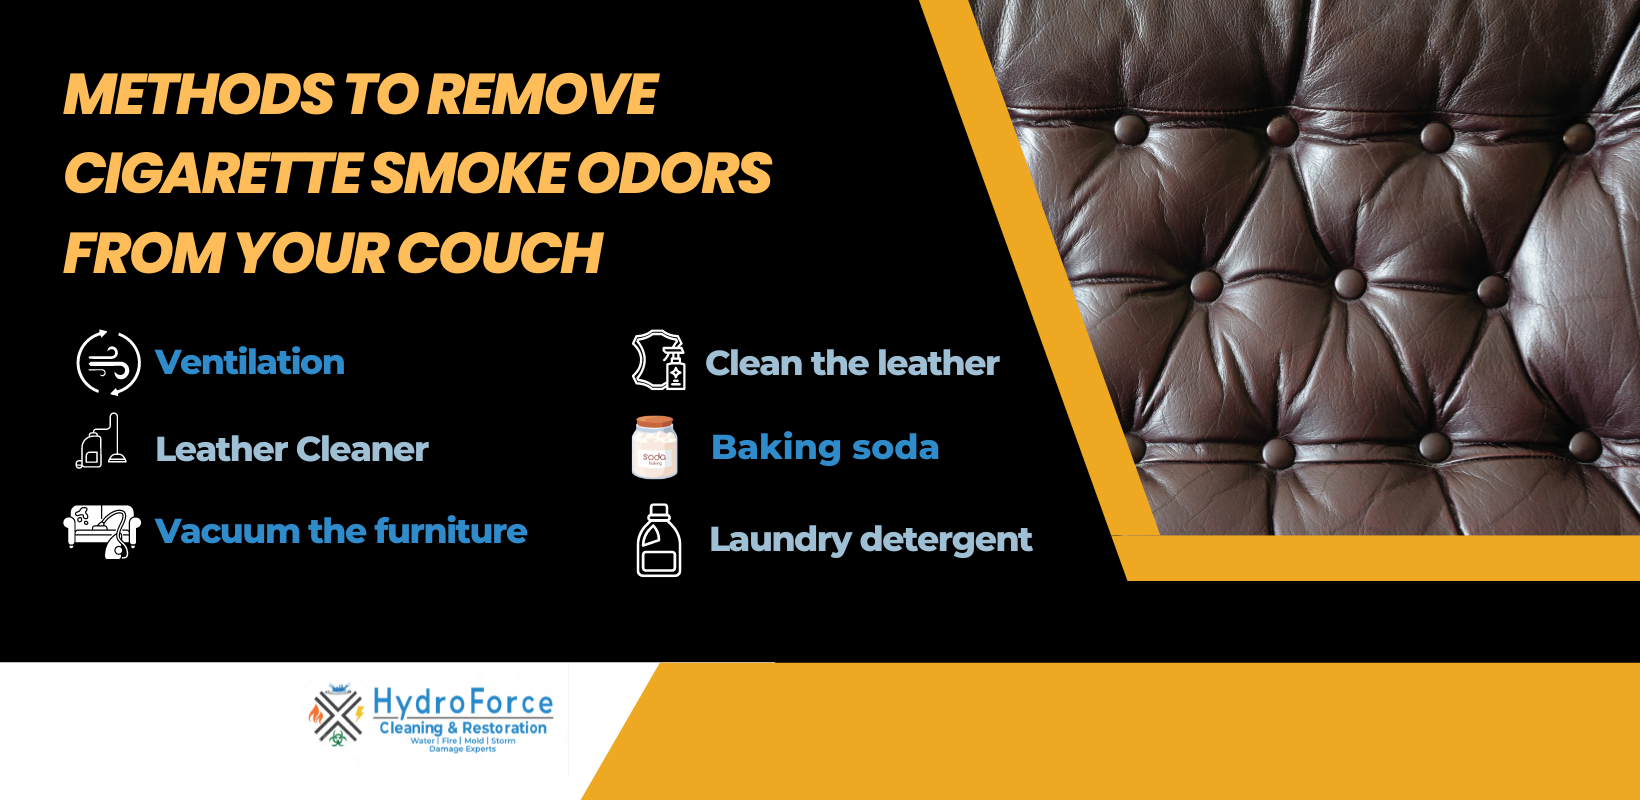 Methods to Remove Cigarette Smoke Odors from Your Couch